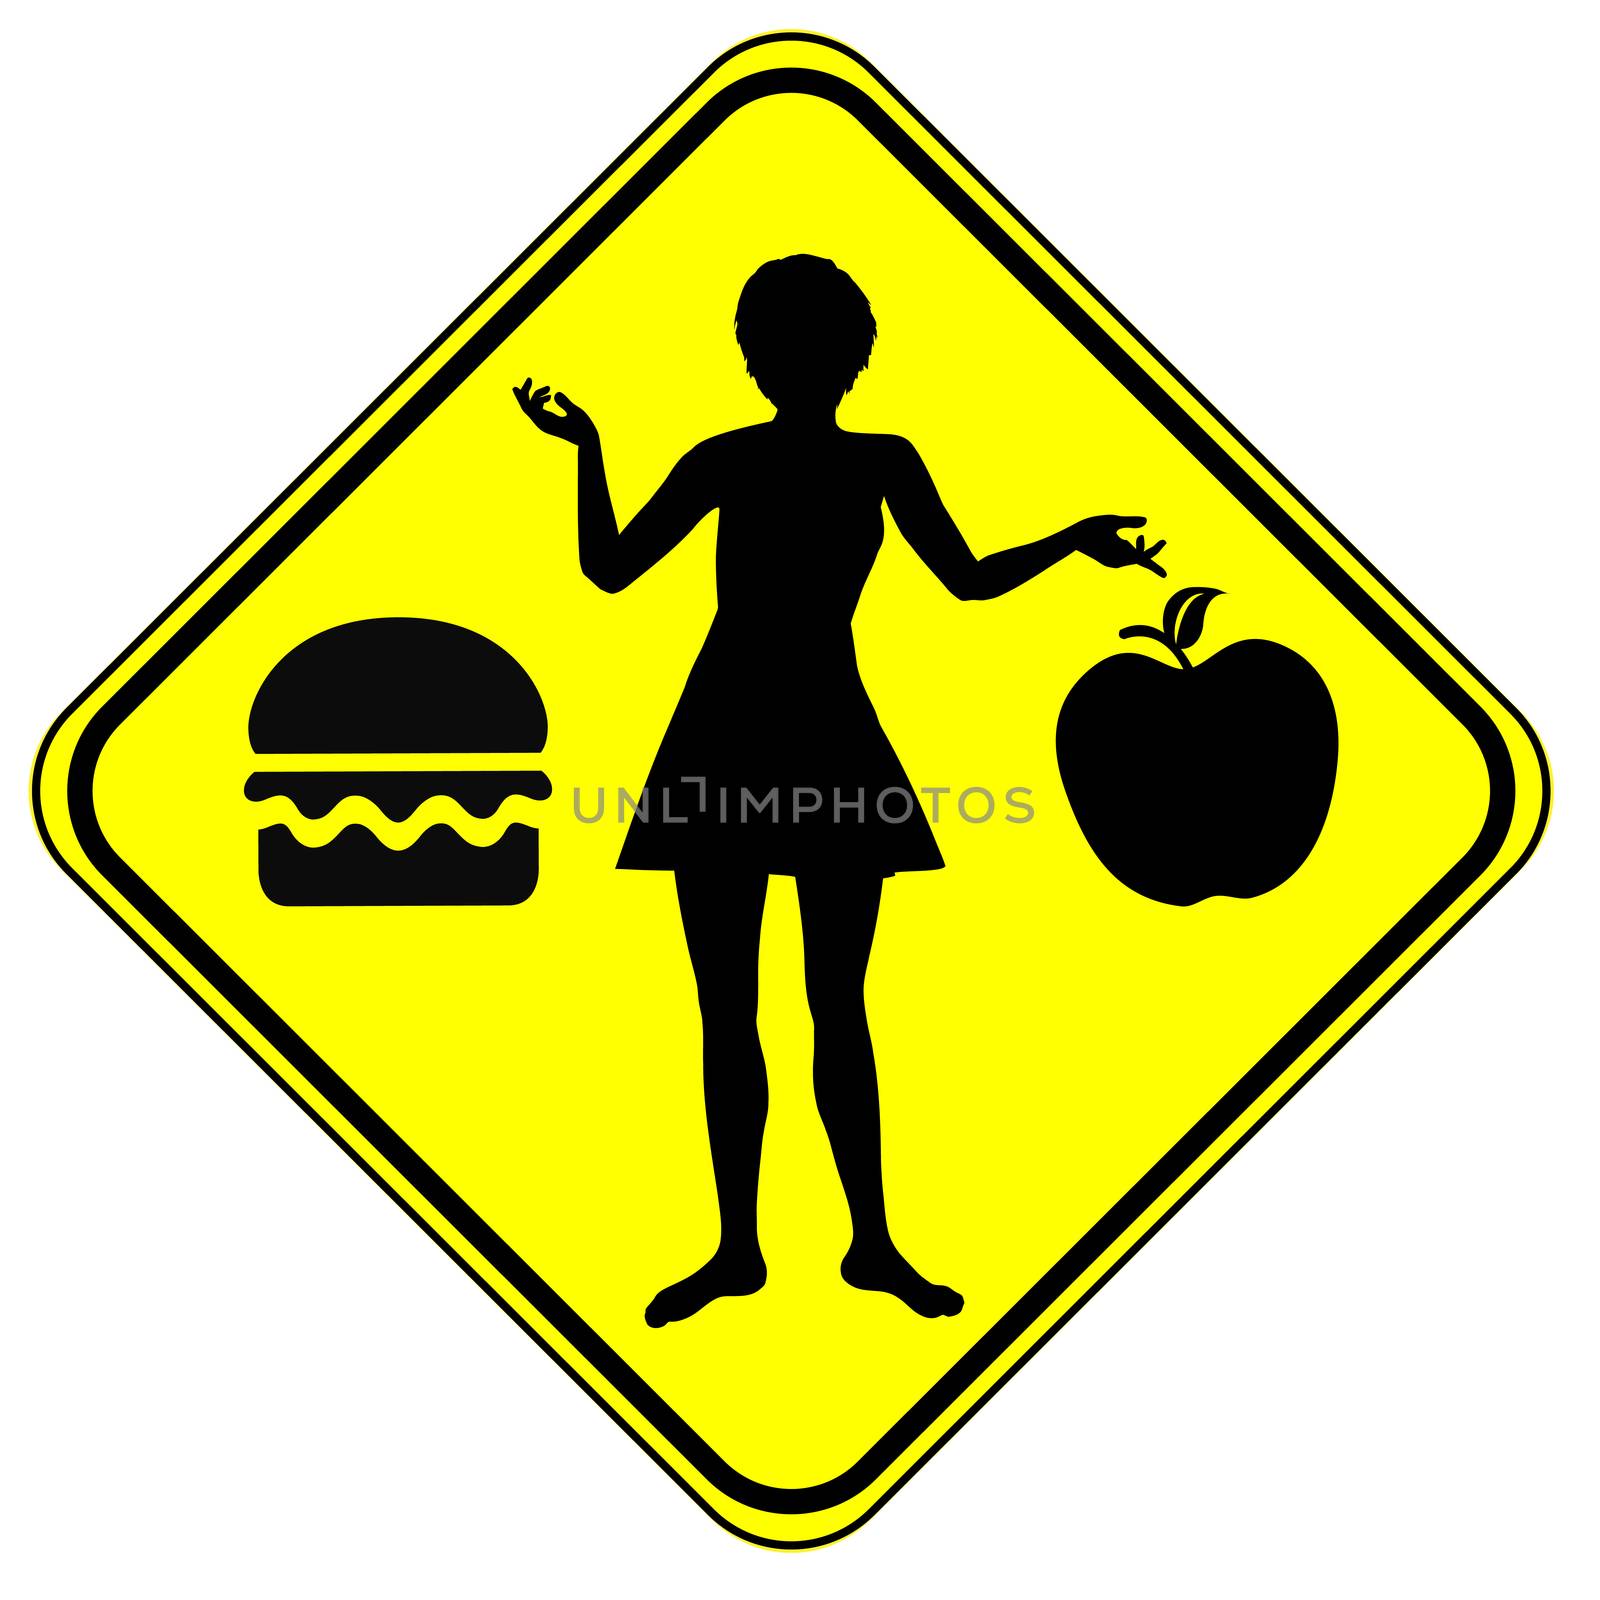 Concept sign of either choosing health food or junk food